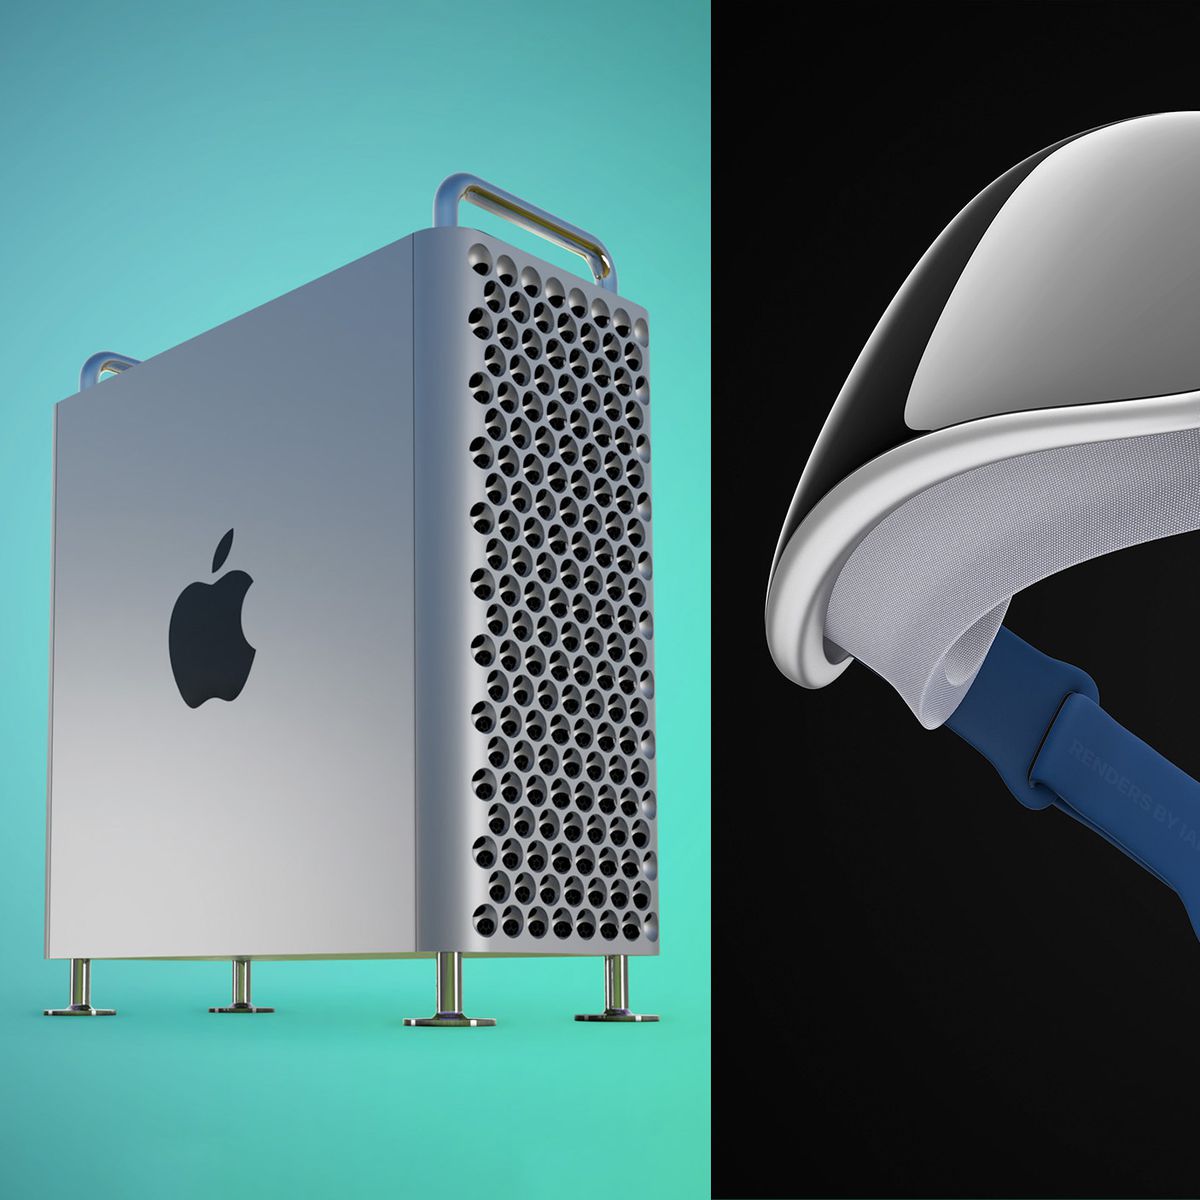 Twitter Reacts to the Apple Mac Pro 'Cheese Grater' 